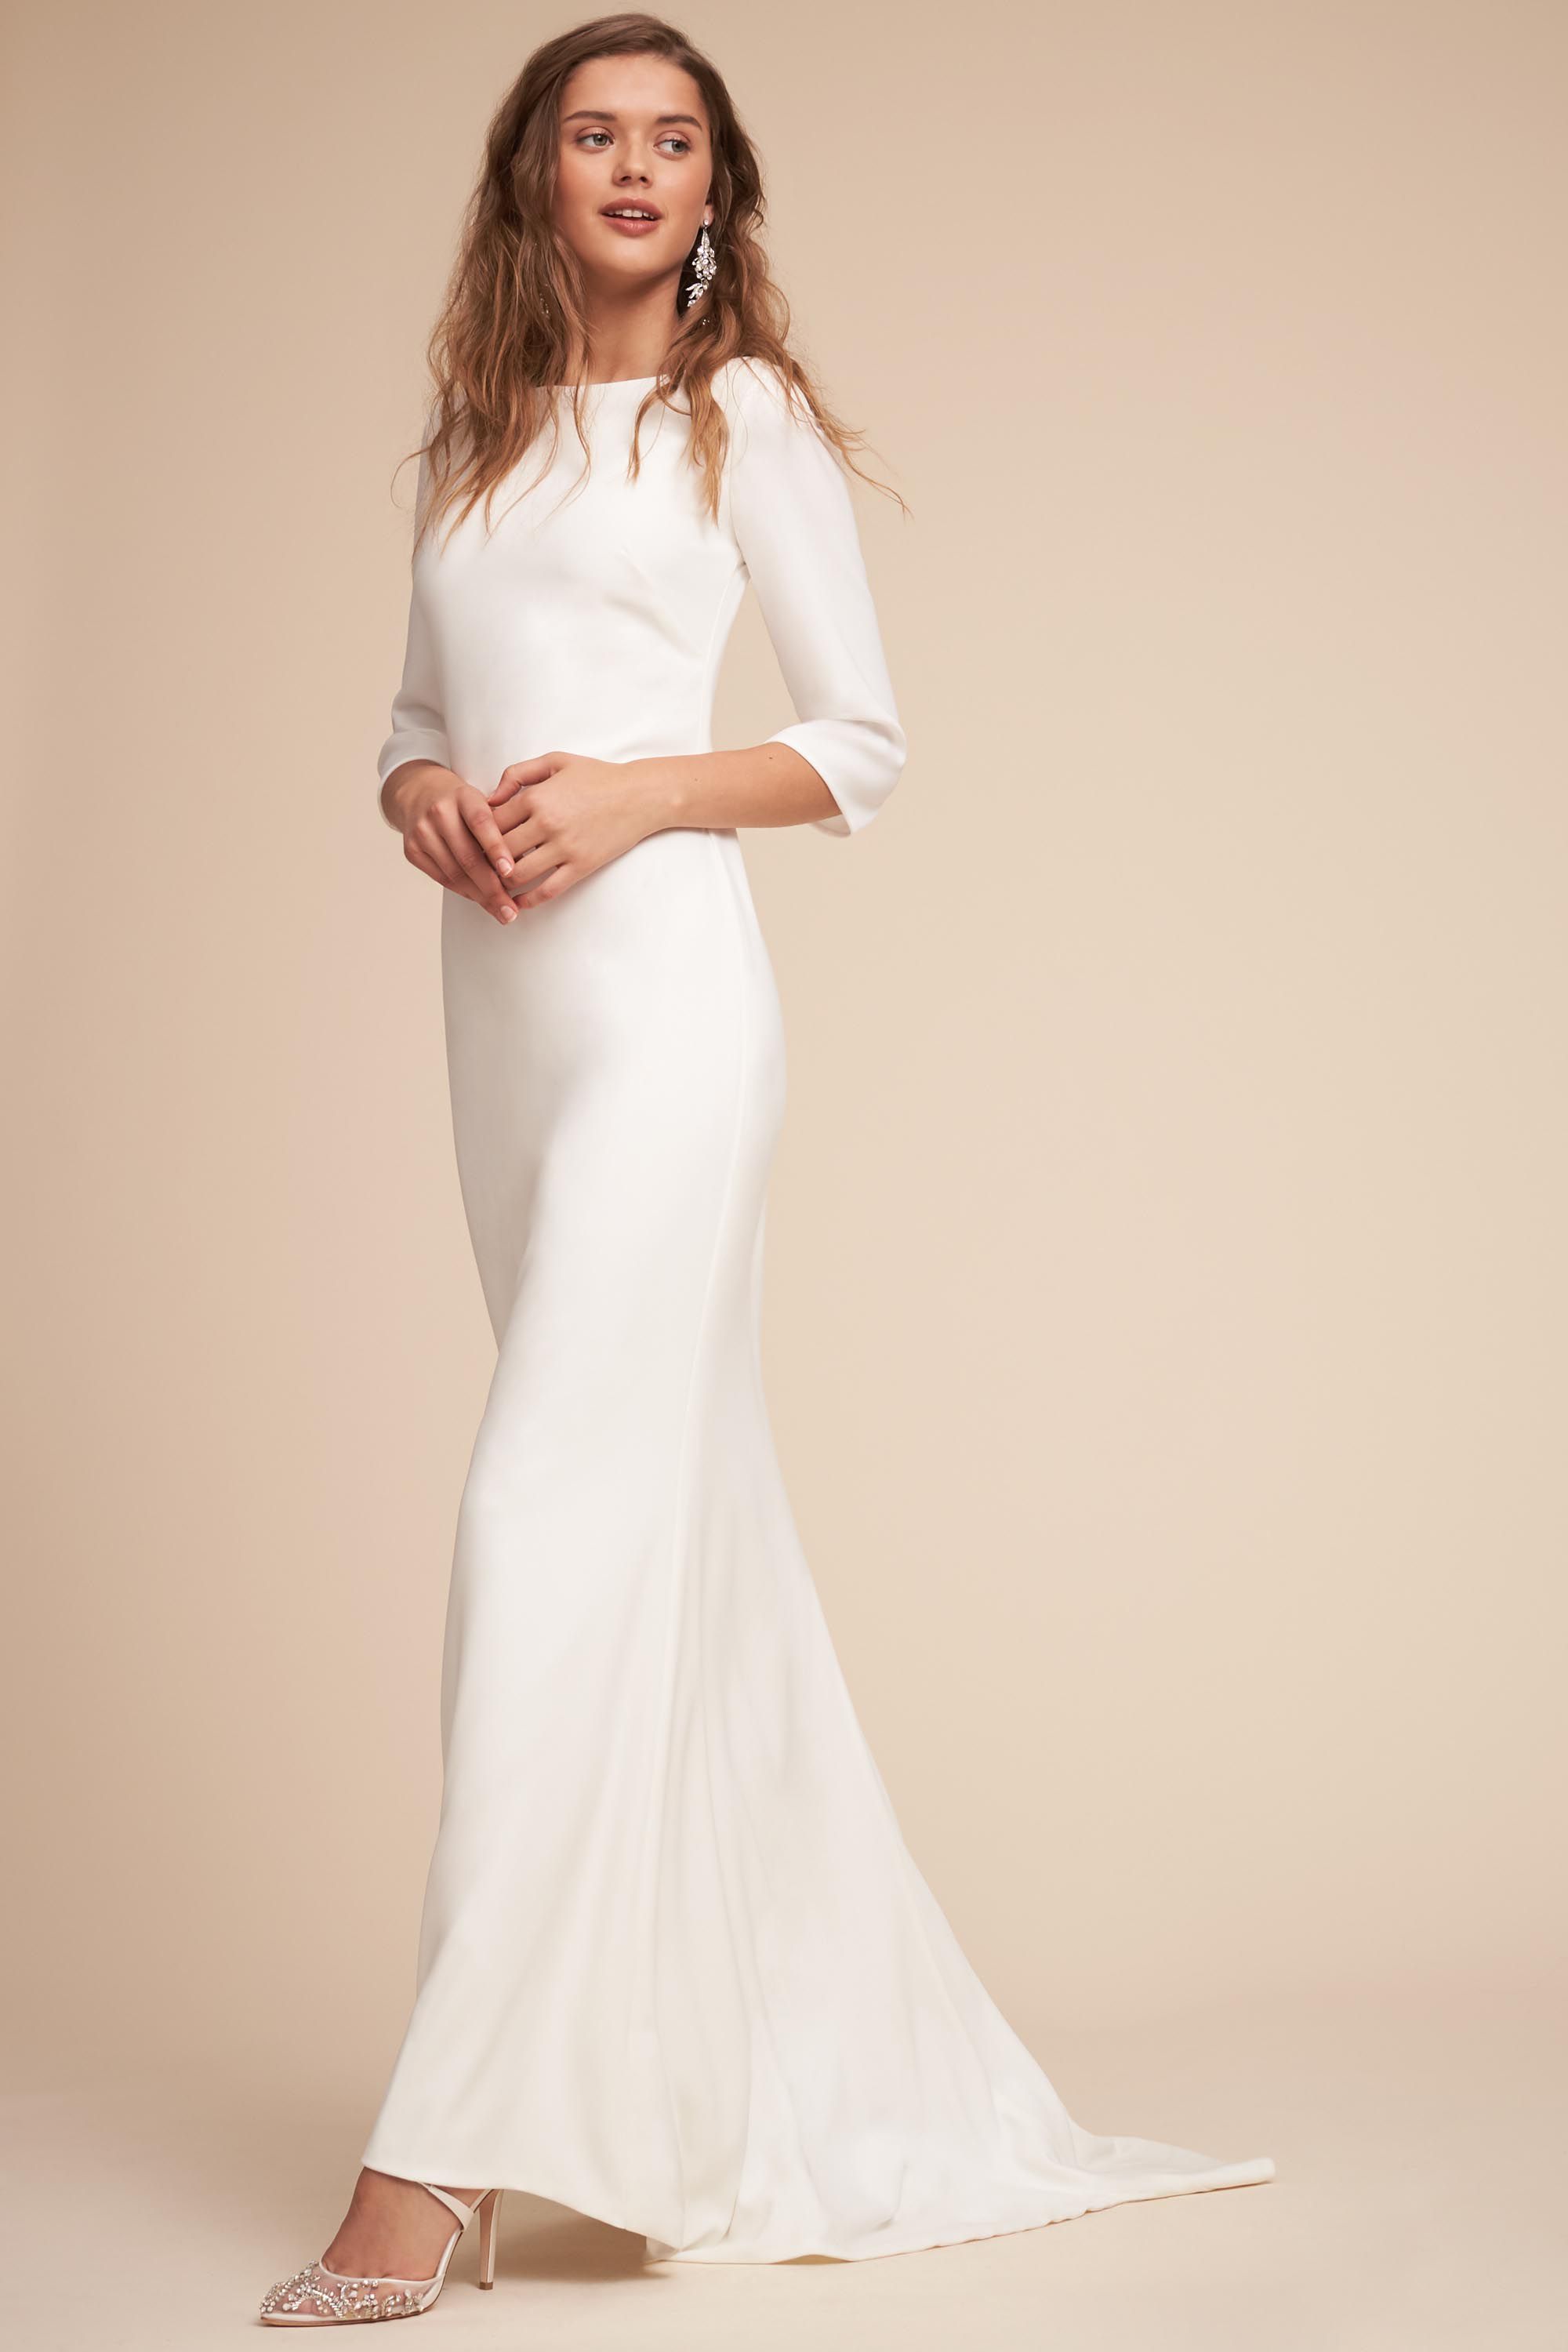 white dresses that could be wedding dressesphoto